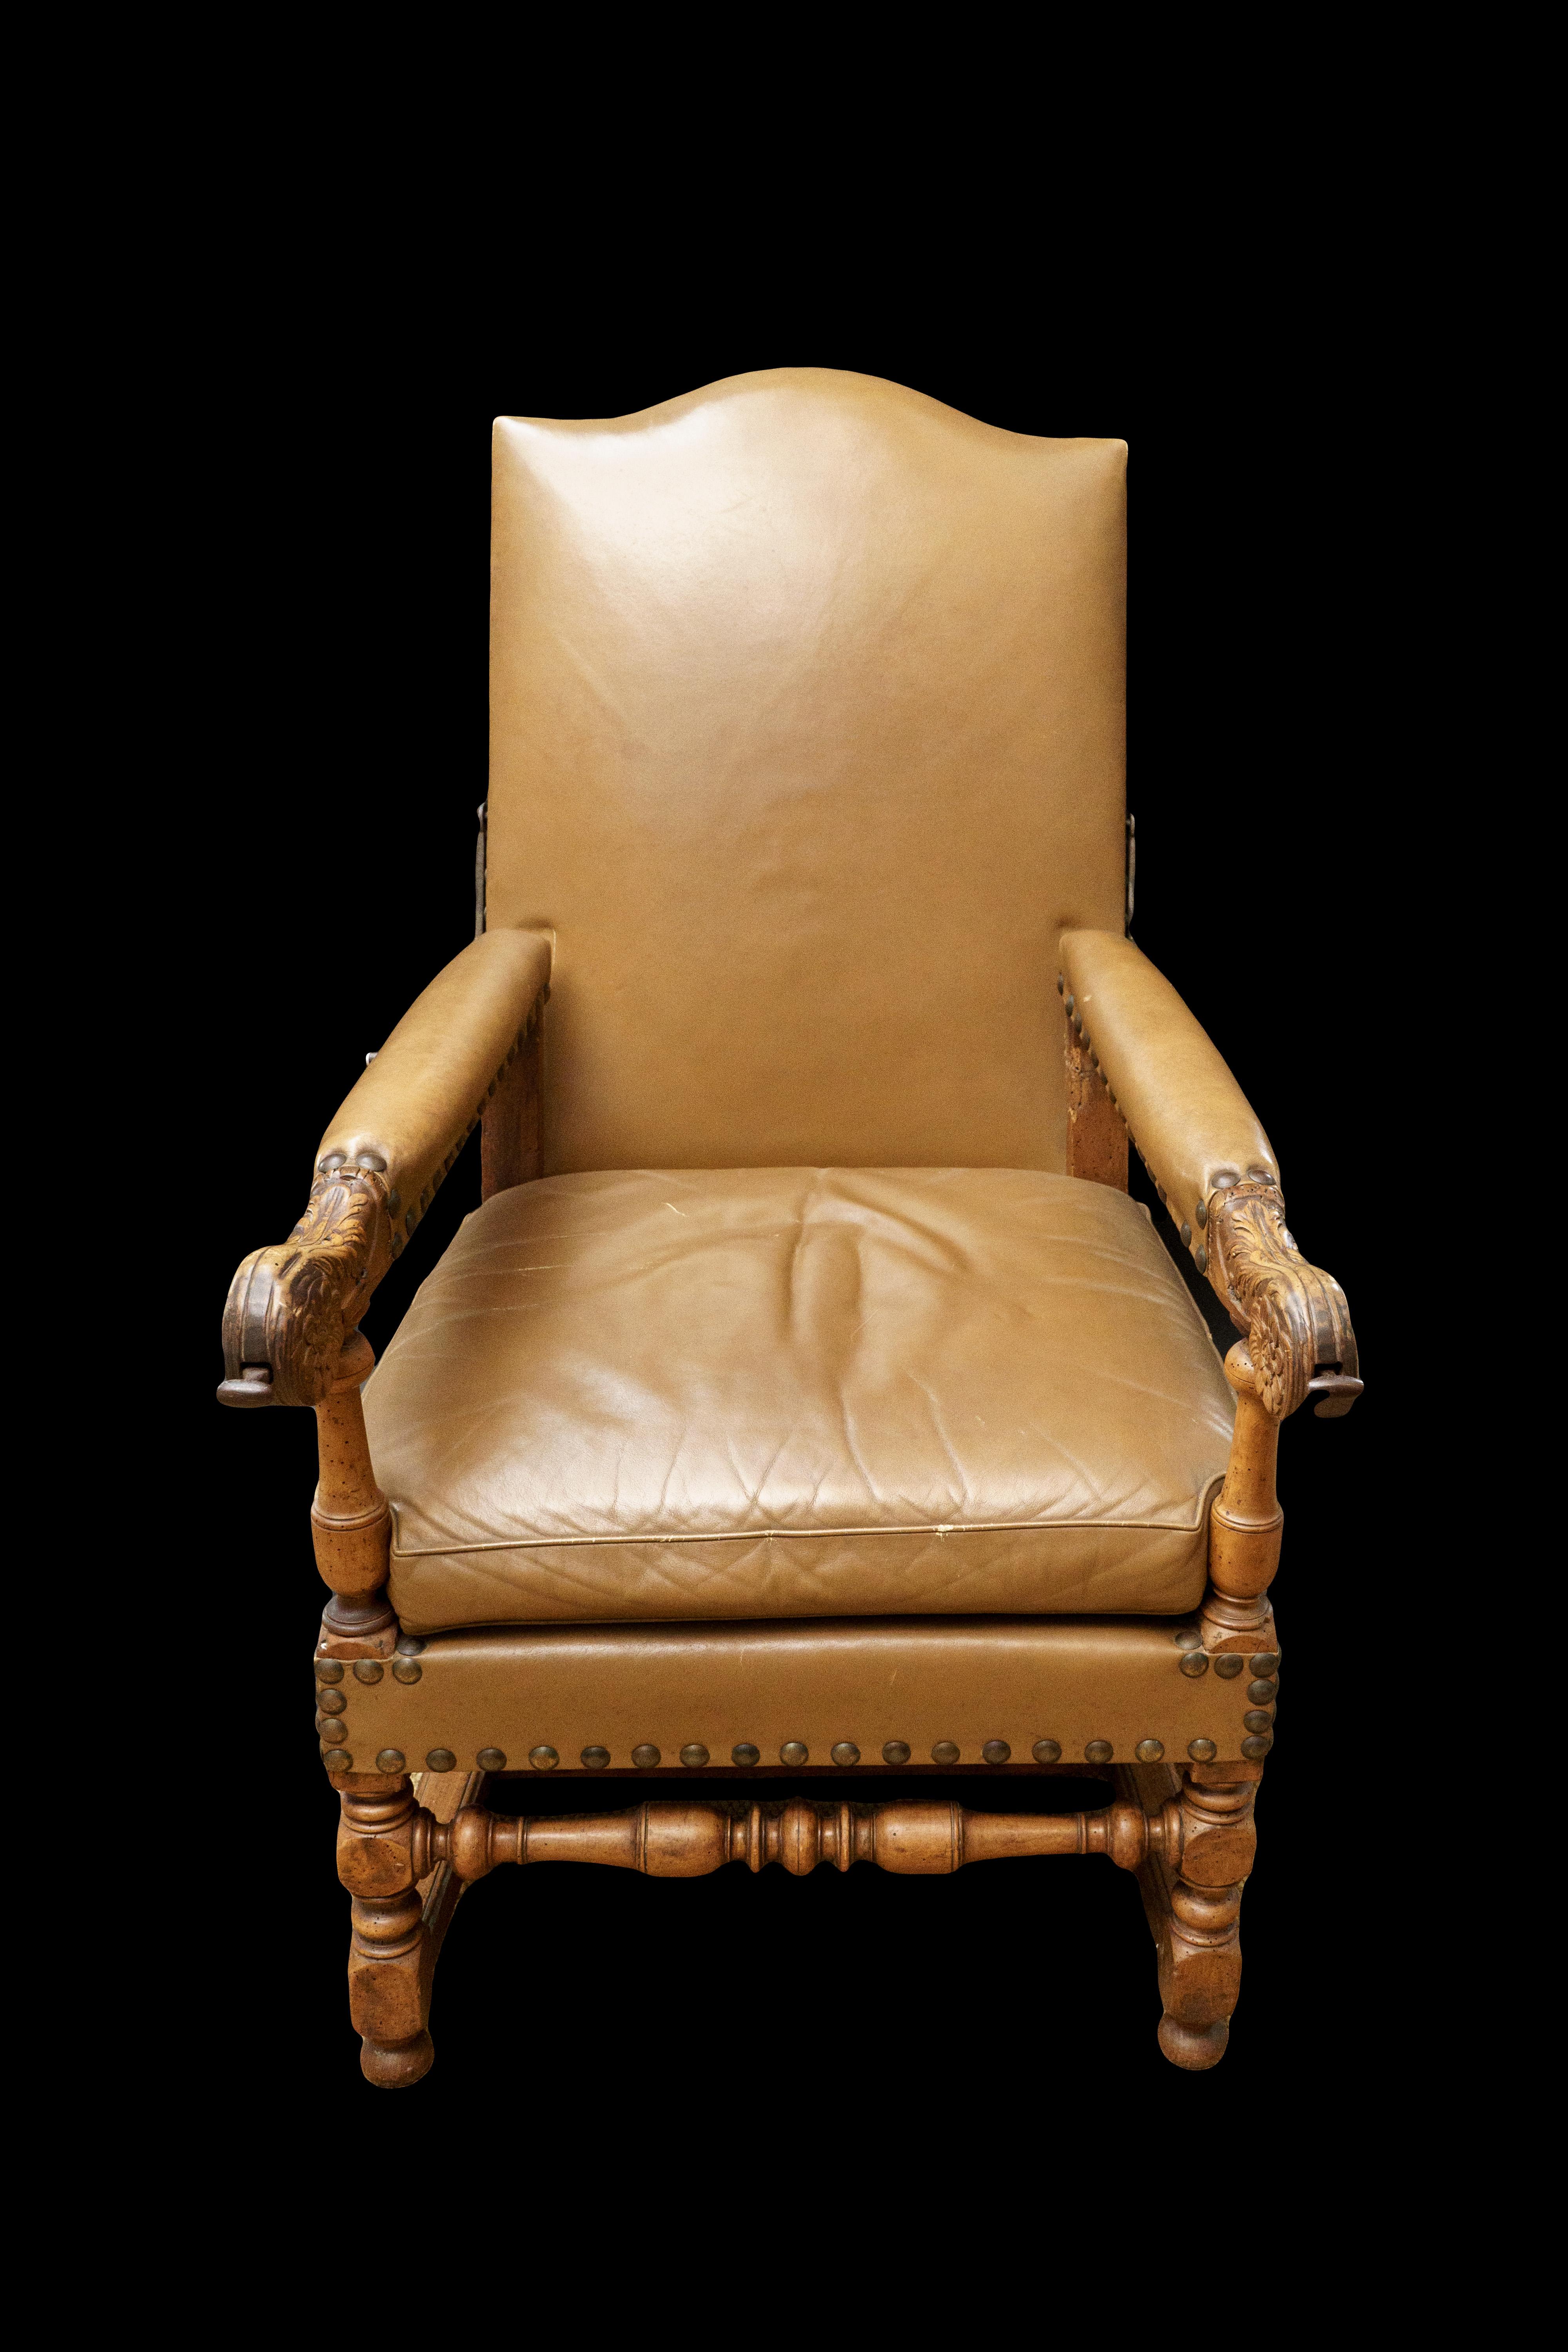 This elegant Reclining Chair Louis XIV is a stunning example of 17th Century French country furniture design and a very rare find. The chair's metal mechanism allows the user to adjust the backrest to a reclining position, offering both comfort and